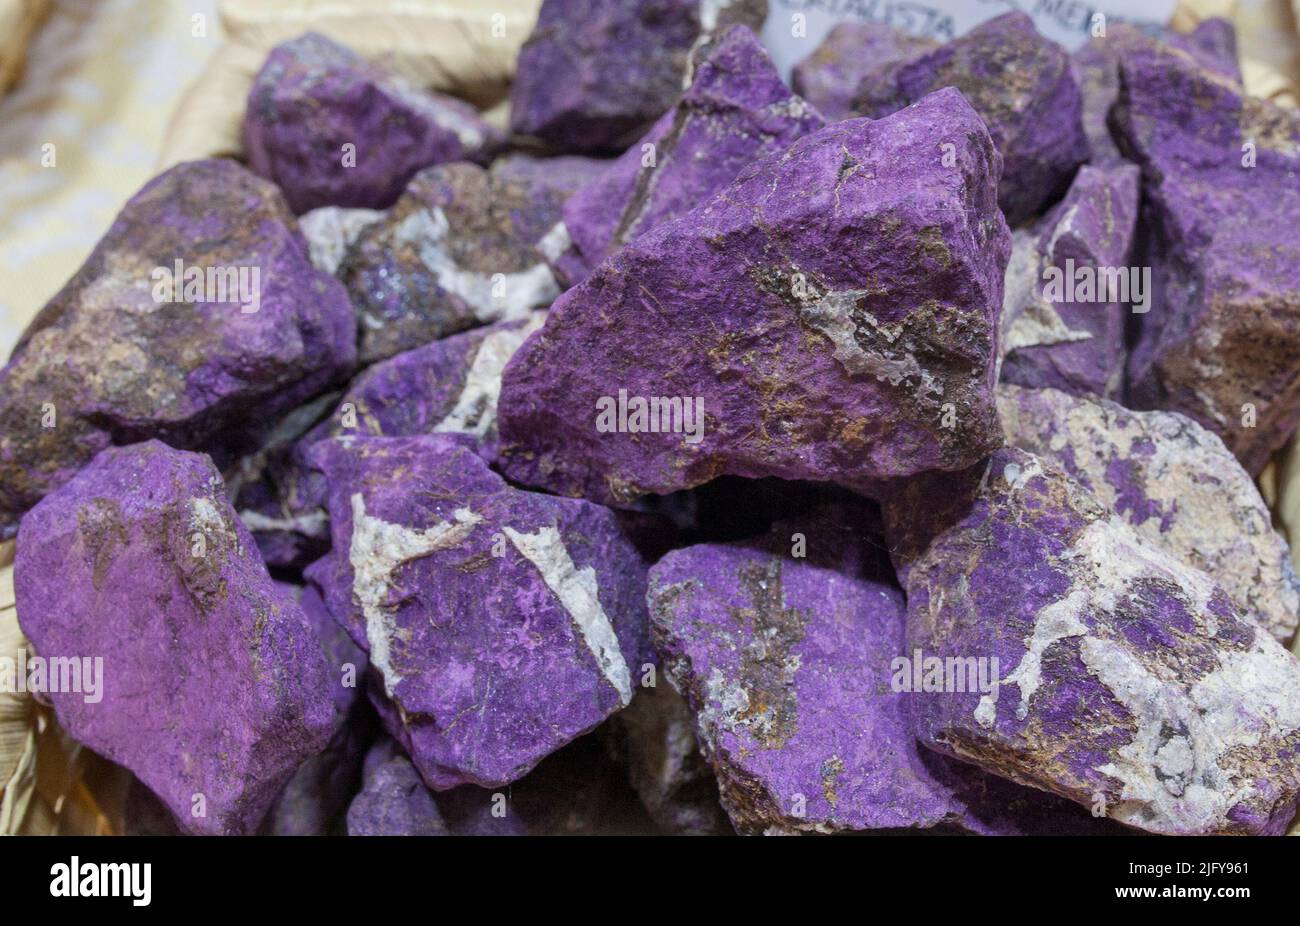 Fragments of purpurite believed to have beneficial health properties. Displayed on basket at street market stall Stock Photo